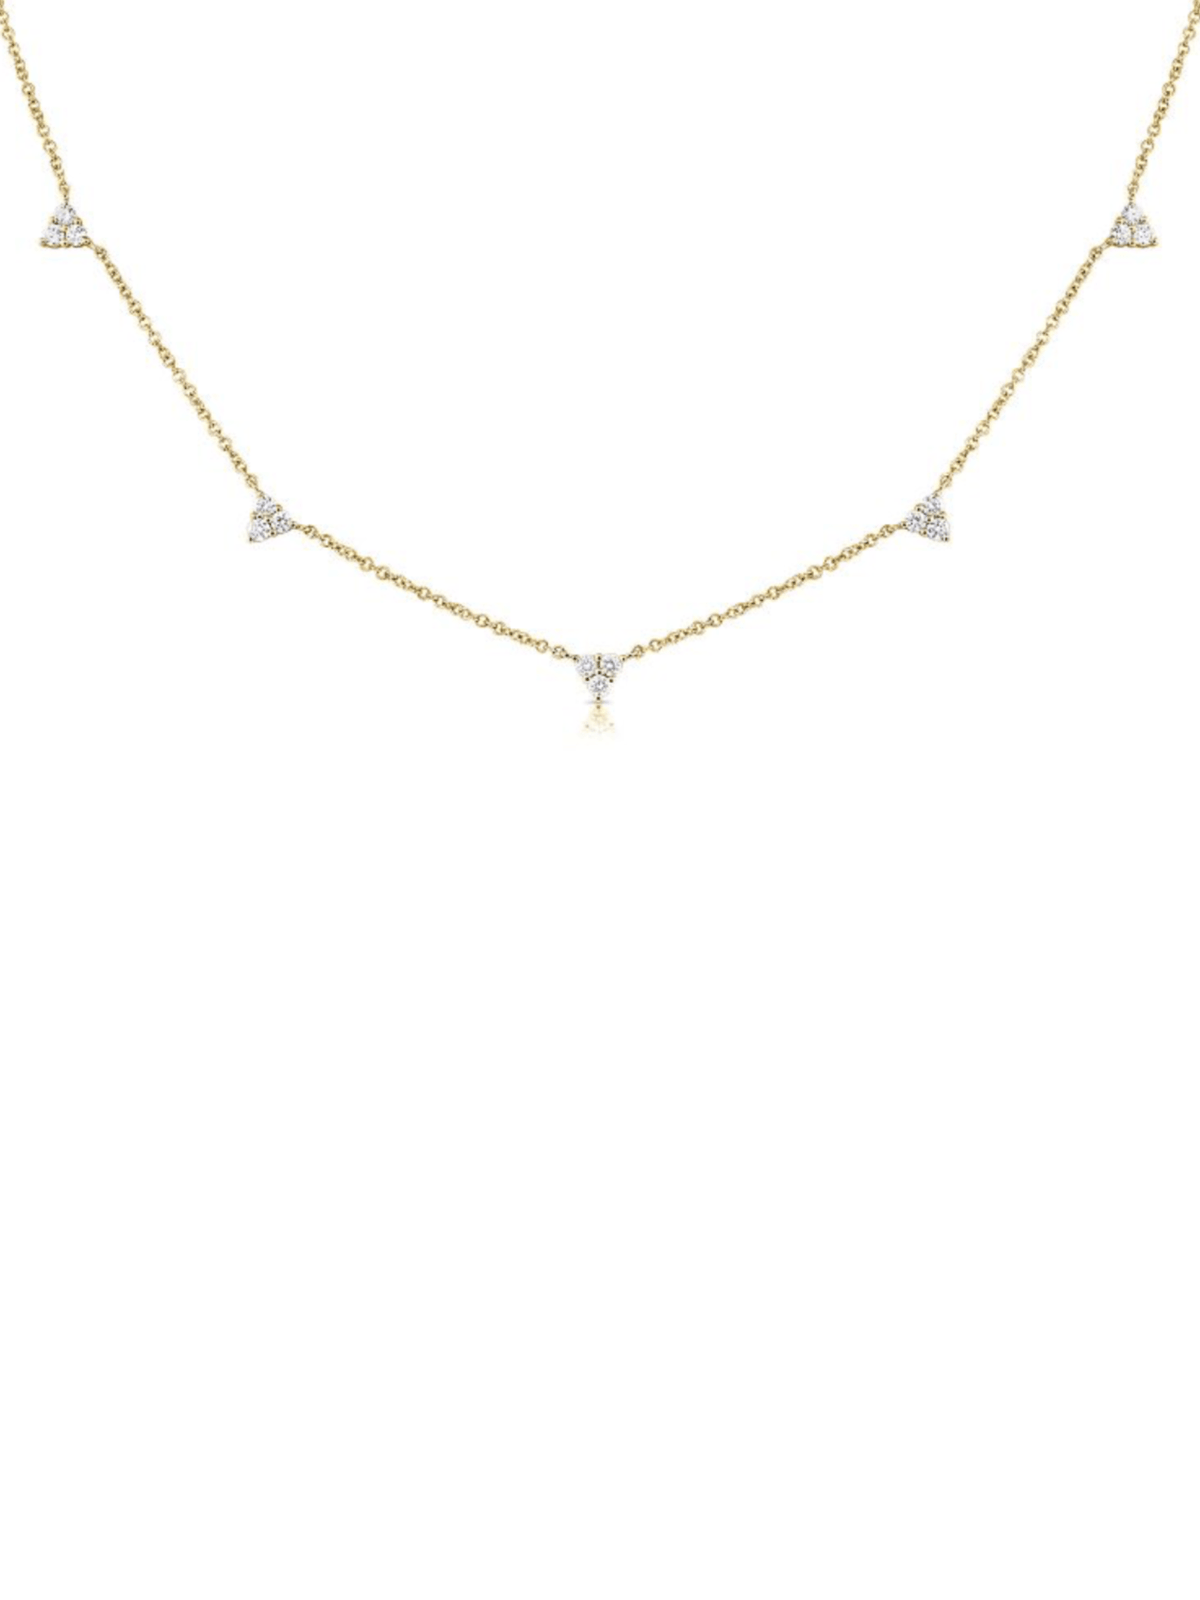 Yellow gold chain necklace with mini diamond trios stationed in between chain on white background